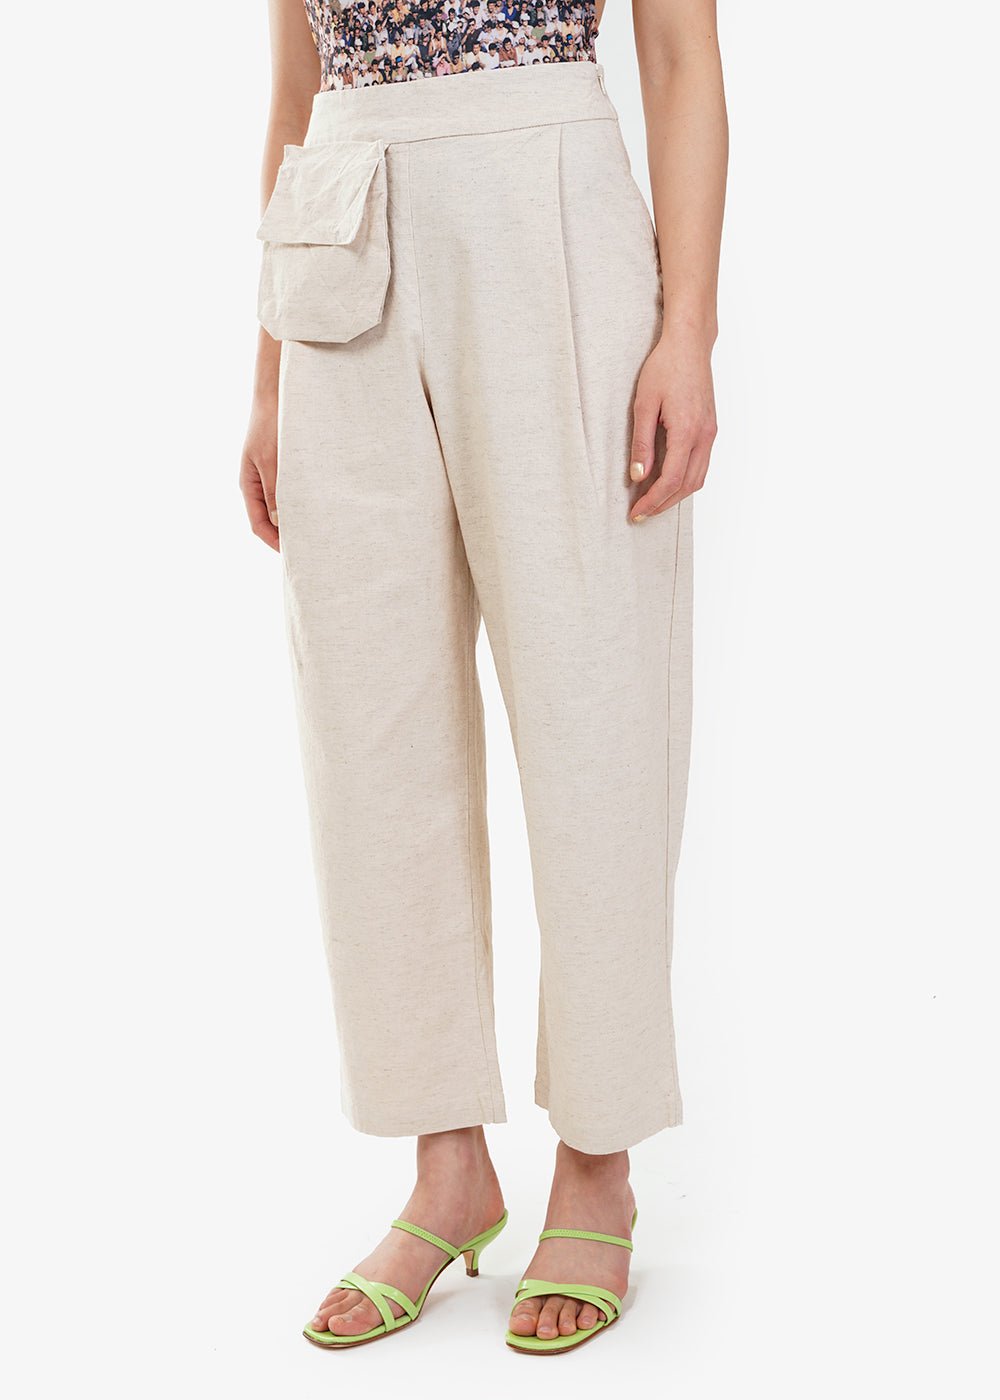 Paloma Wool Jueves Pants — Shop sustainable fashion and slow fashion at New Classics Studios